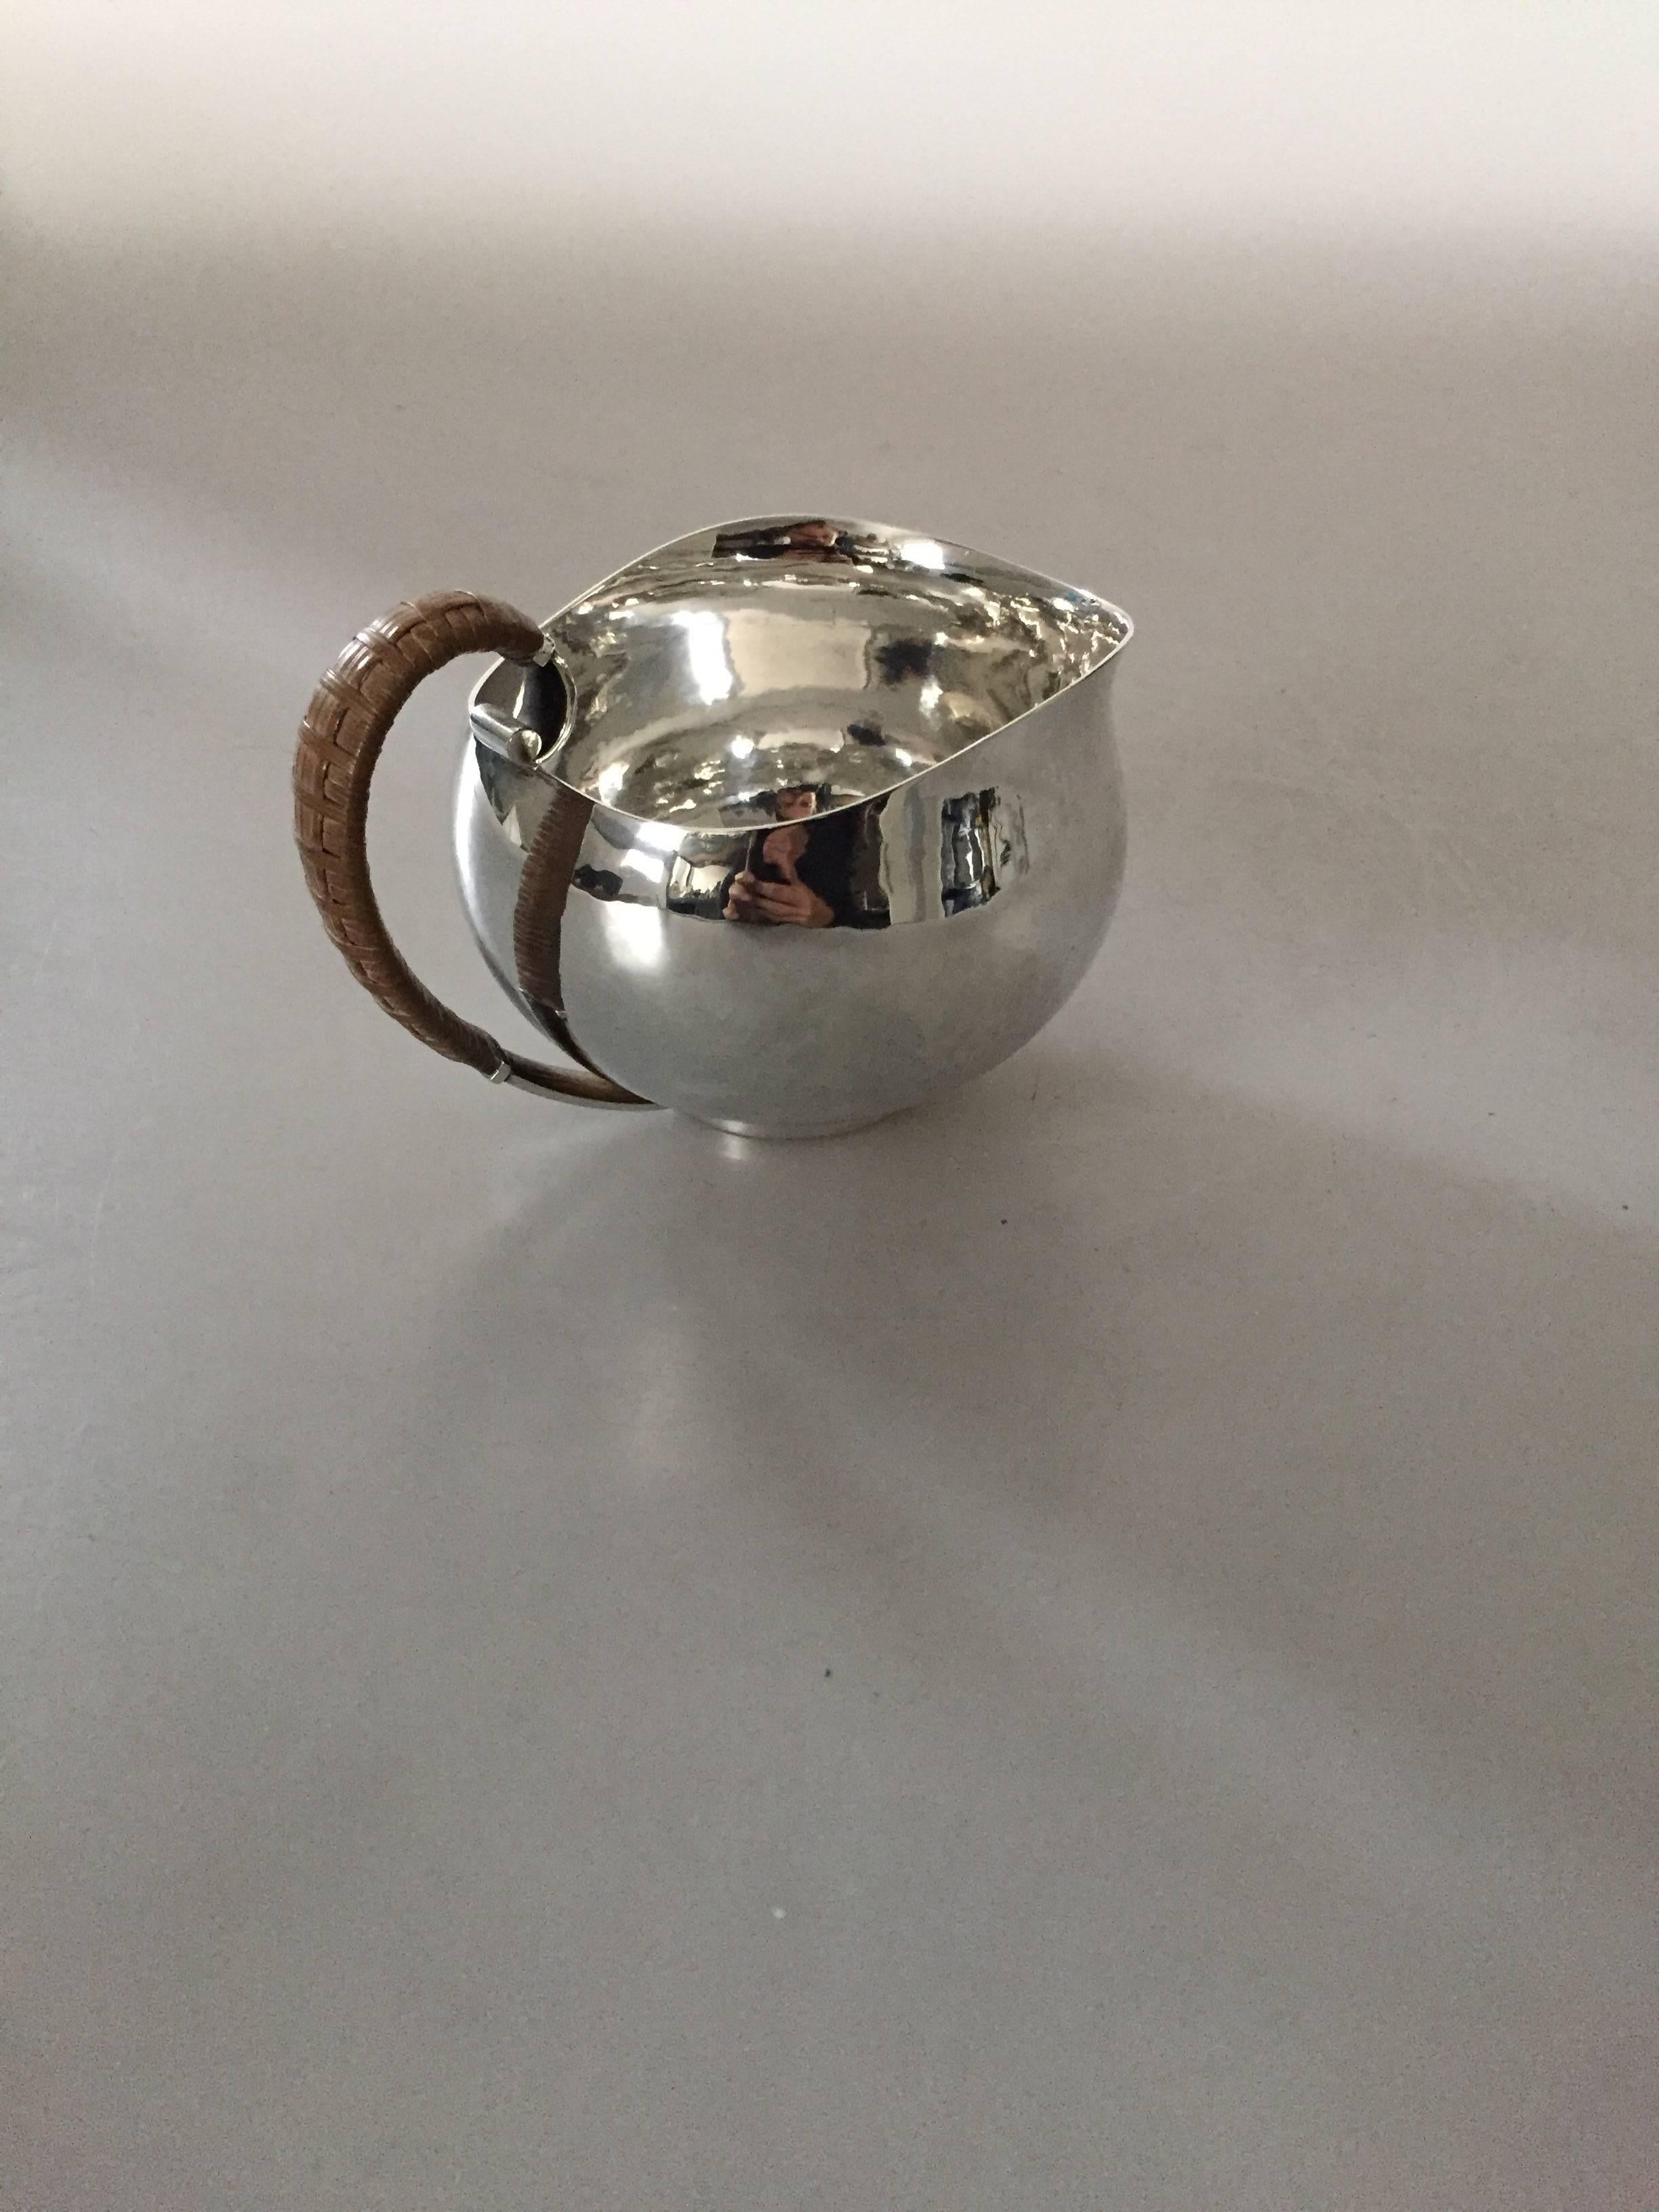 Hans Hansen sterling silver sauce pitcher #366 by Karl Gustav Hansen. Is in good condition. 

Measures: 12, 5 cm x 8 cm. 

Hans Hansen (1884-1940) was a Danish silversmithy. He opened his own smithy and shop in Kolding, Denmark in 1906. Starting